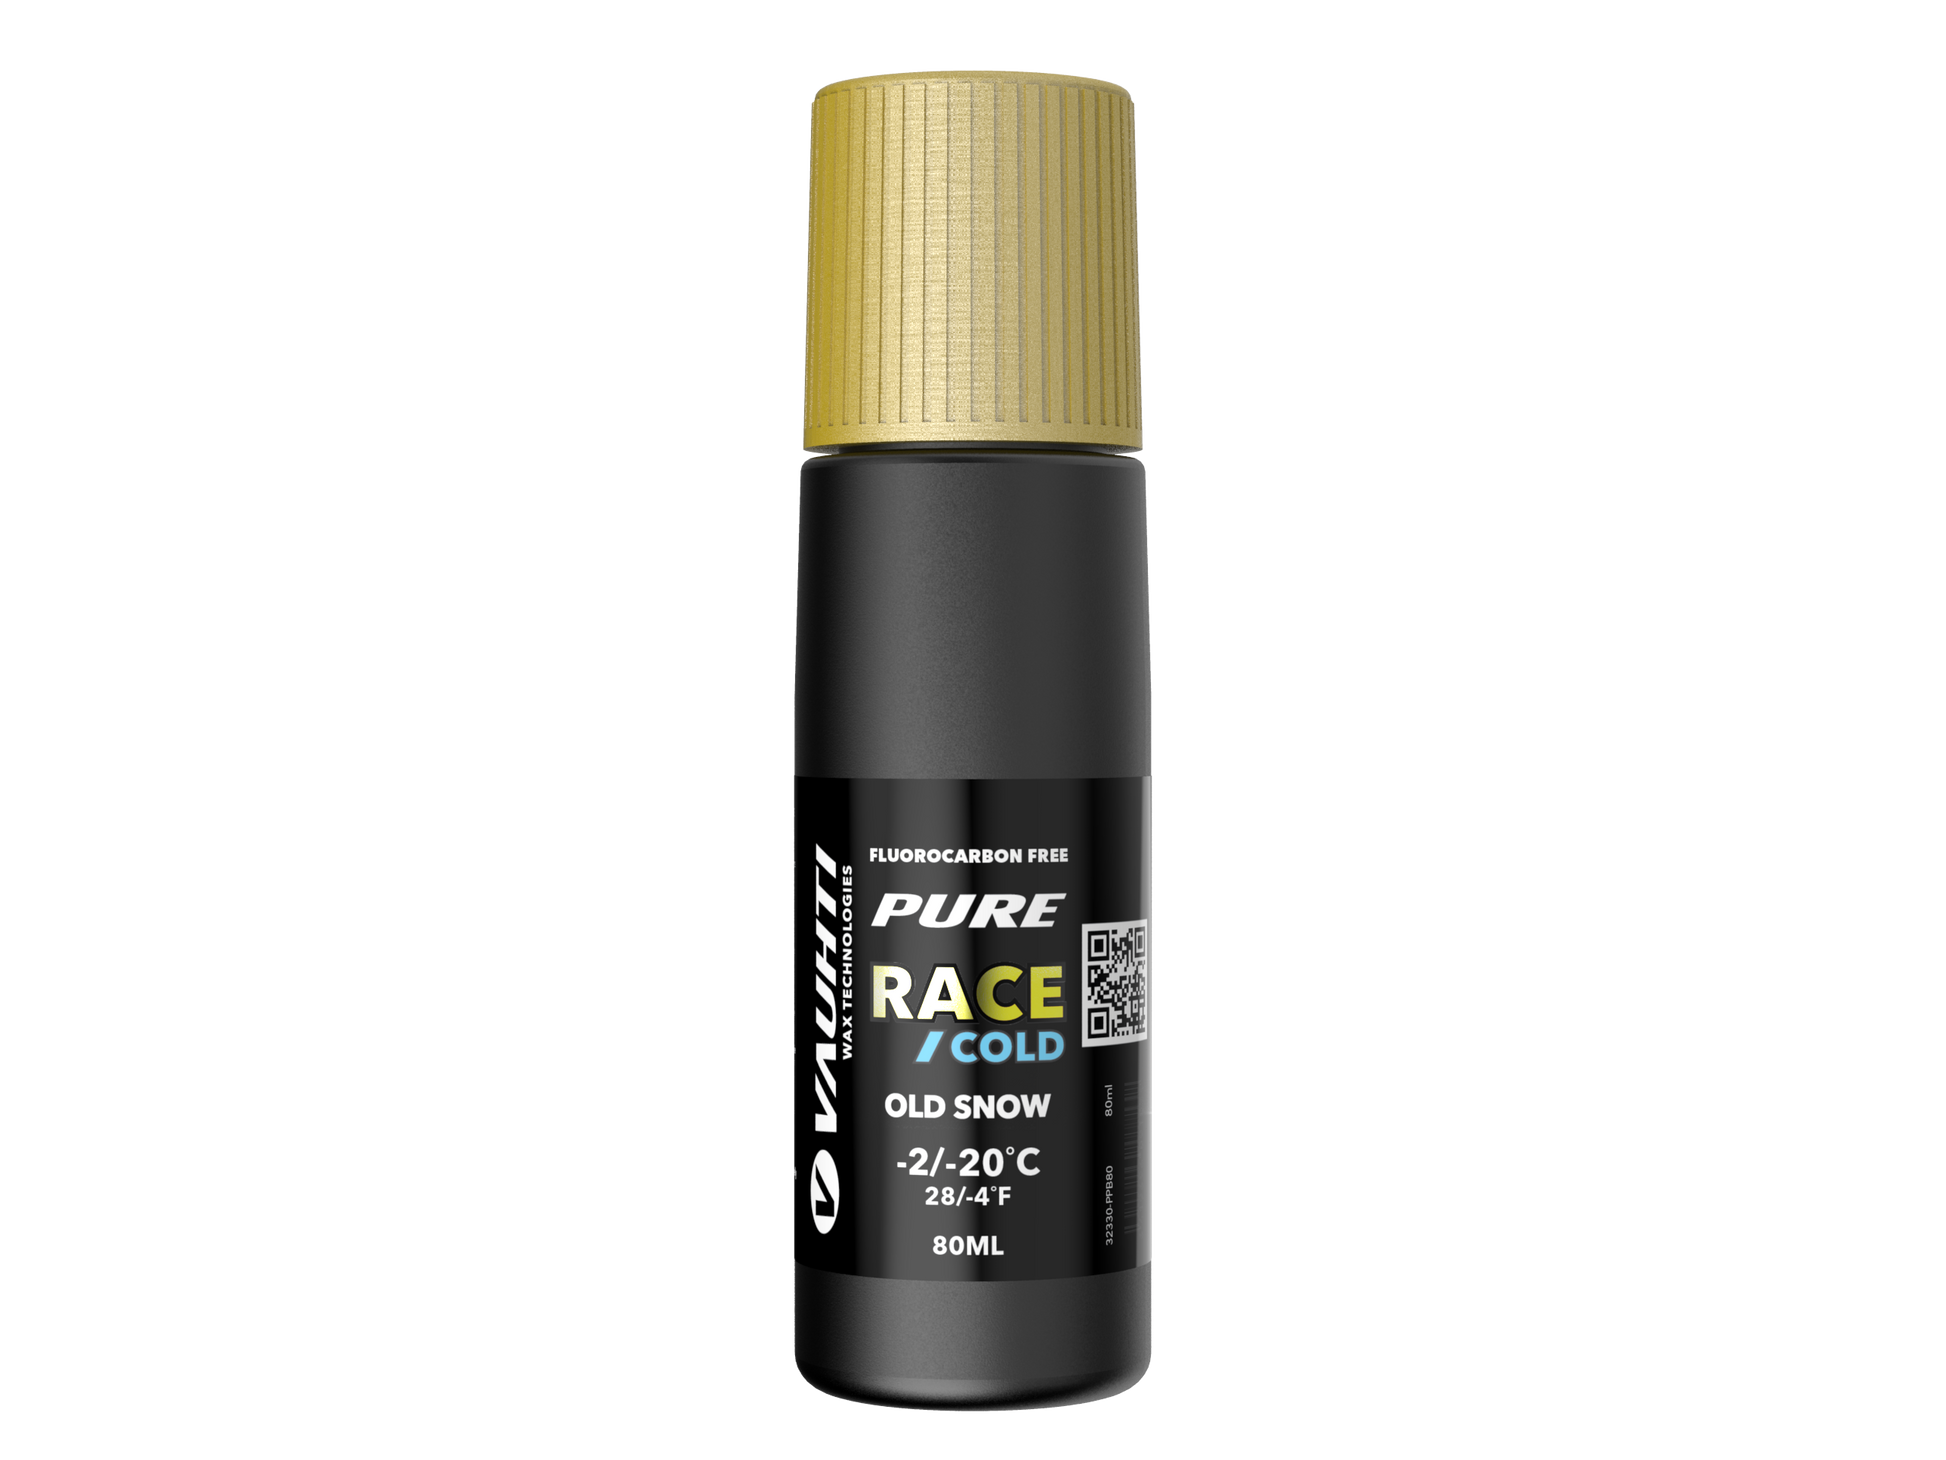 Bottle of PURE RACE OLD SNOW COLD LIQUID GLIDE